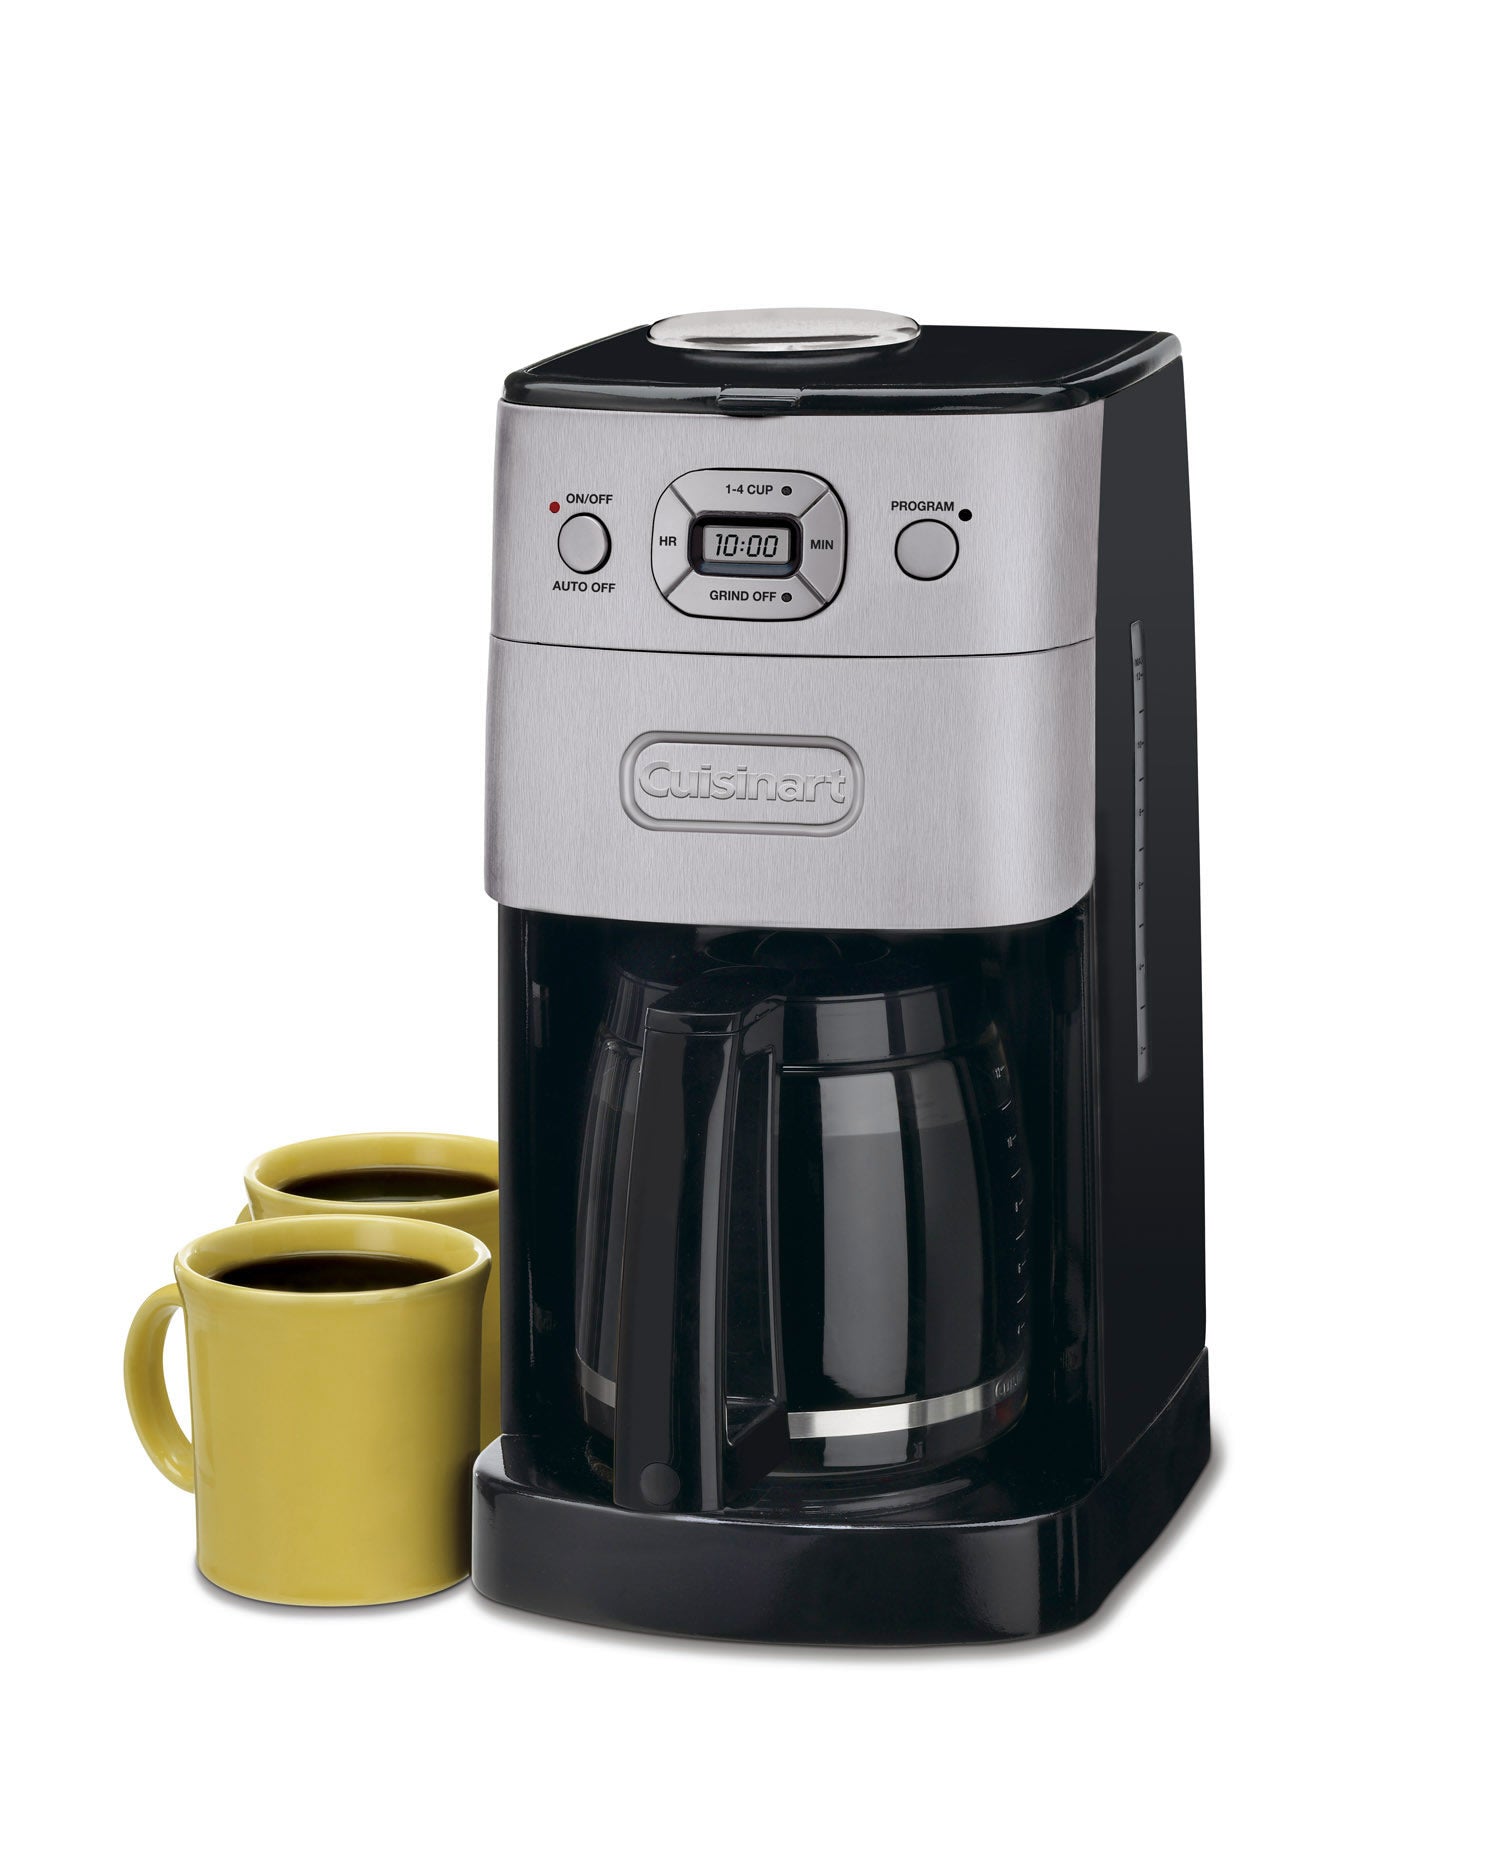 Cuisinart Grind & Brew 12-Cup Automatic Coffee Maker Review: Convenience at  the Cost of Quality